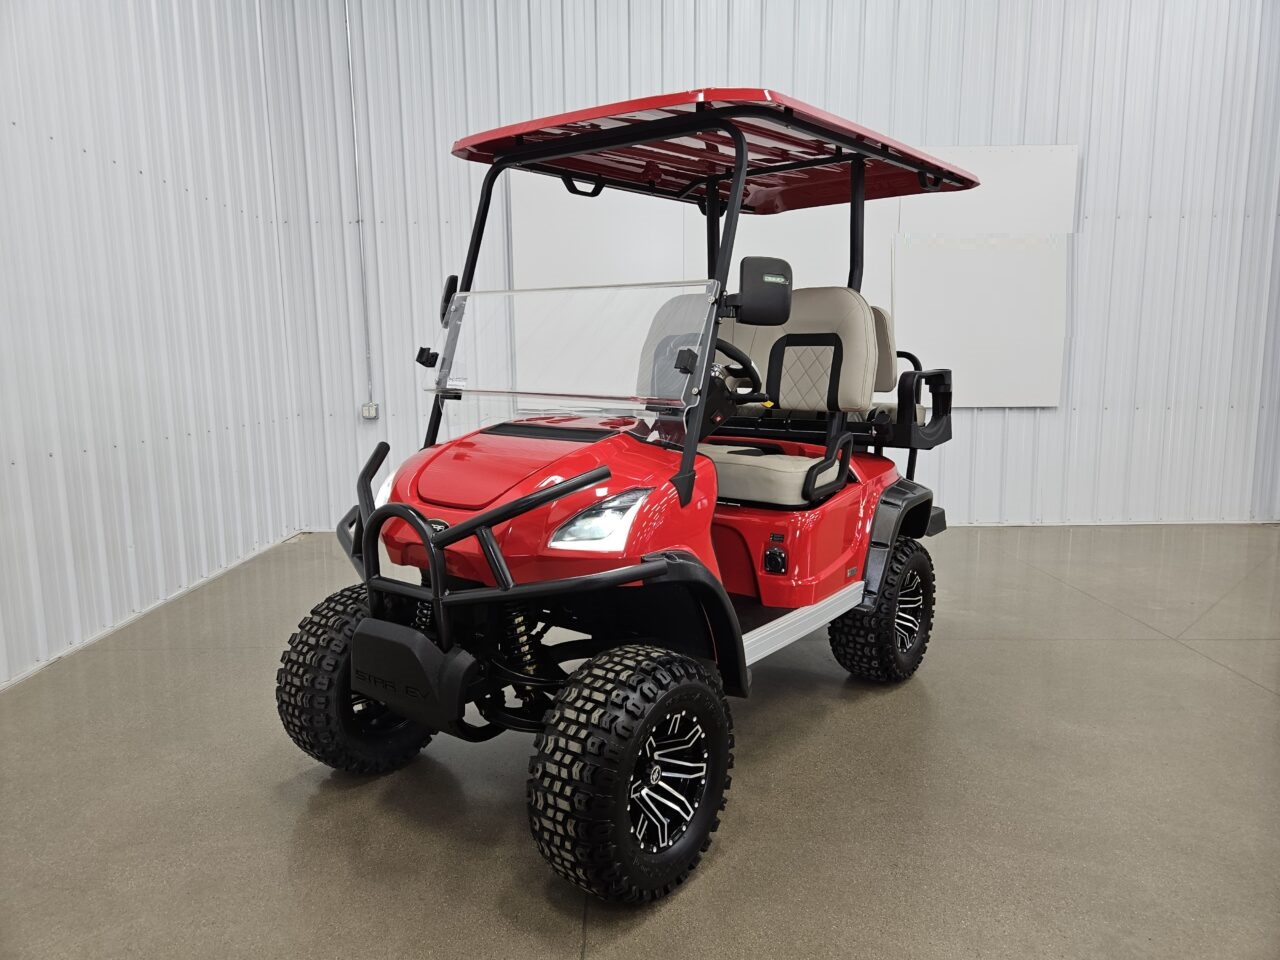 2022 Star Ev Sirius 2+2 Lithium Ion Golf Cart Lsv, Torch Red For Sale